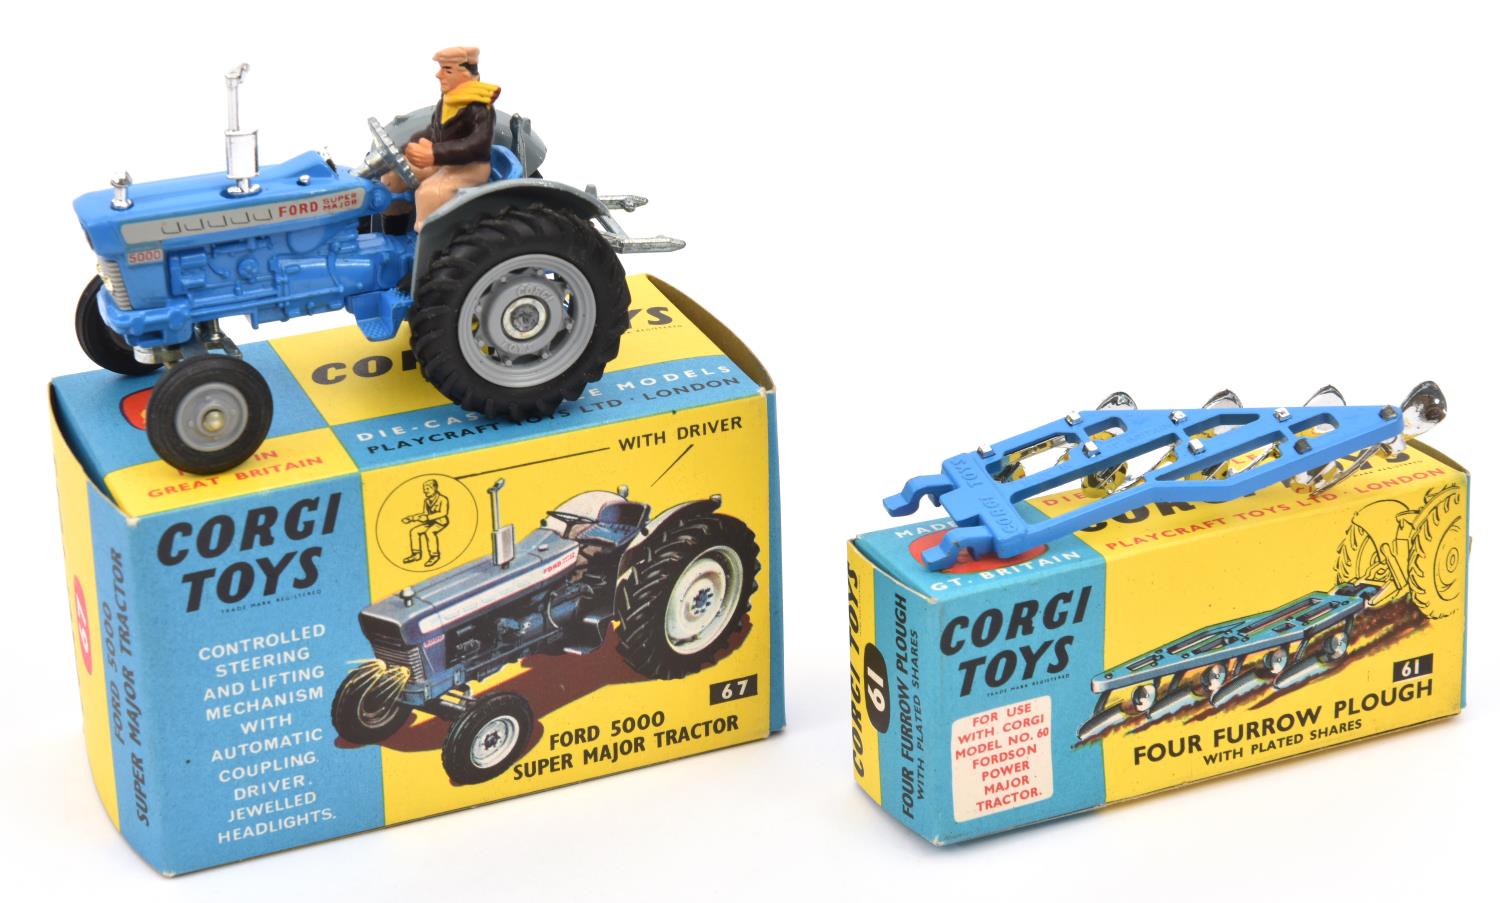 2 Corgi Toys. A Ford 5000 Super Major Tractor (67), complete with driver and instructions. A Four